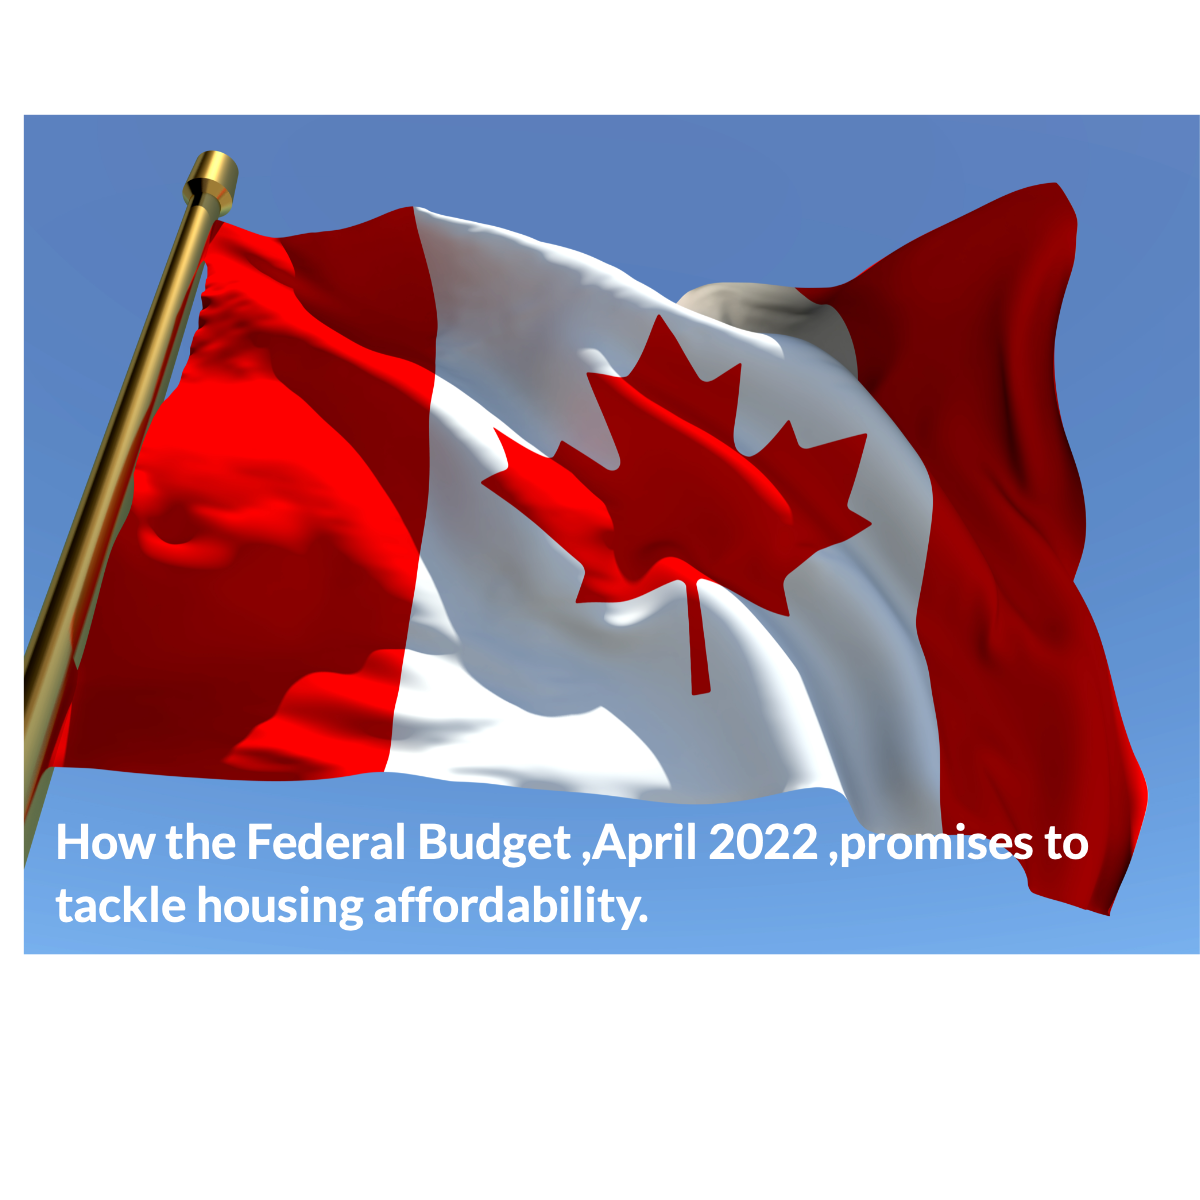 2022 Federal Budget and Housing Affordability